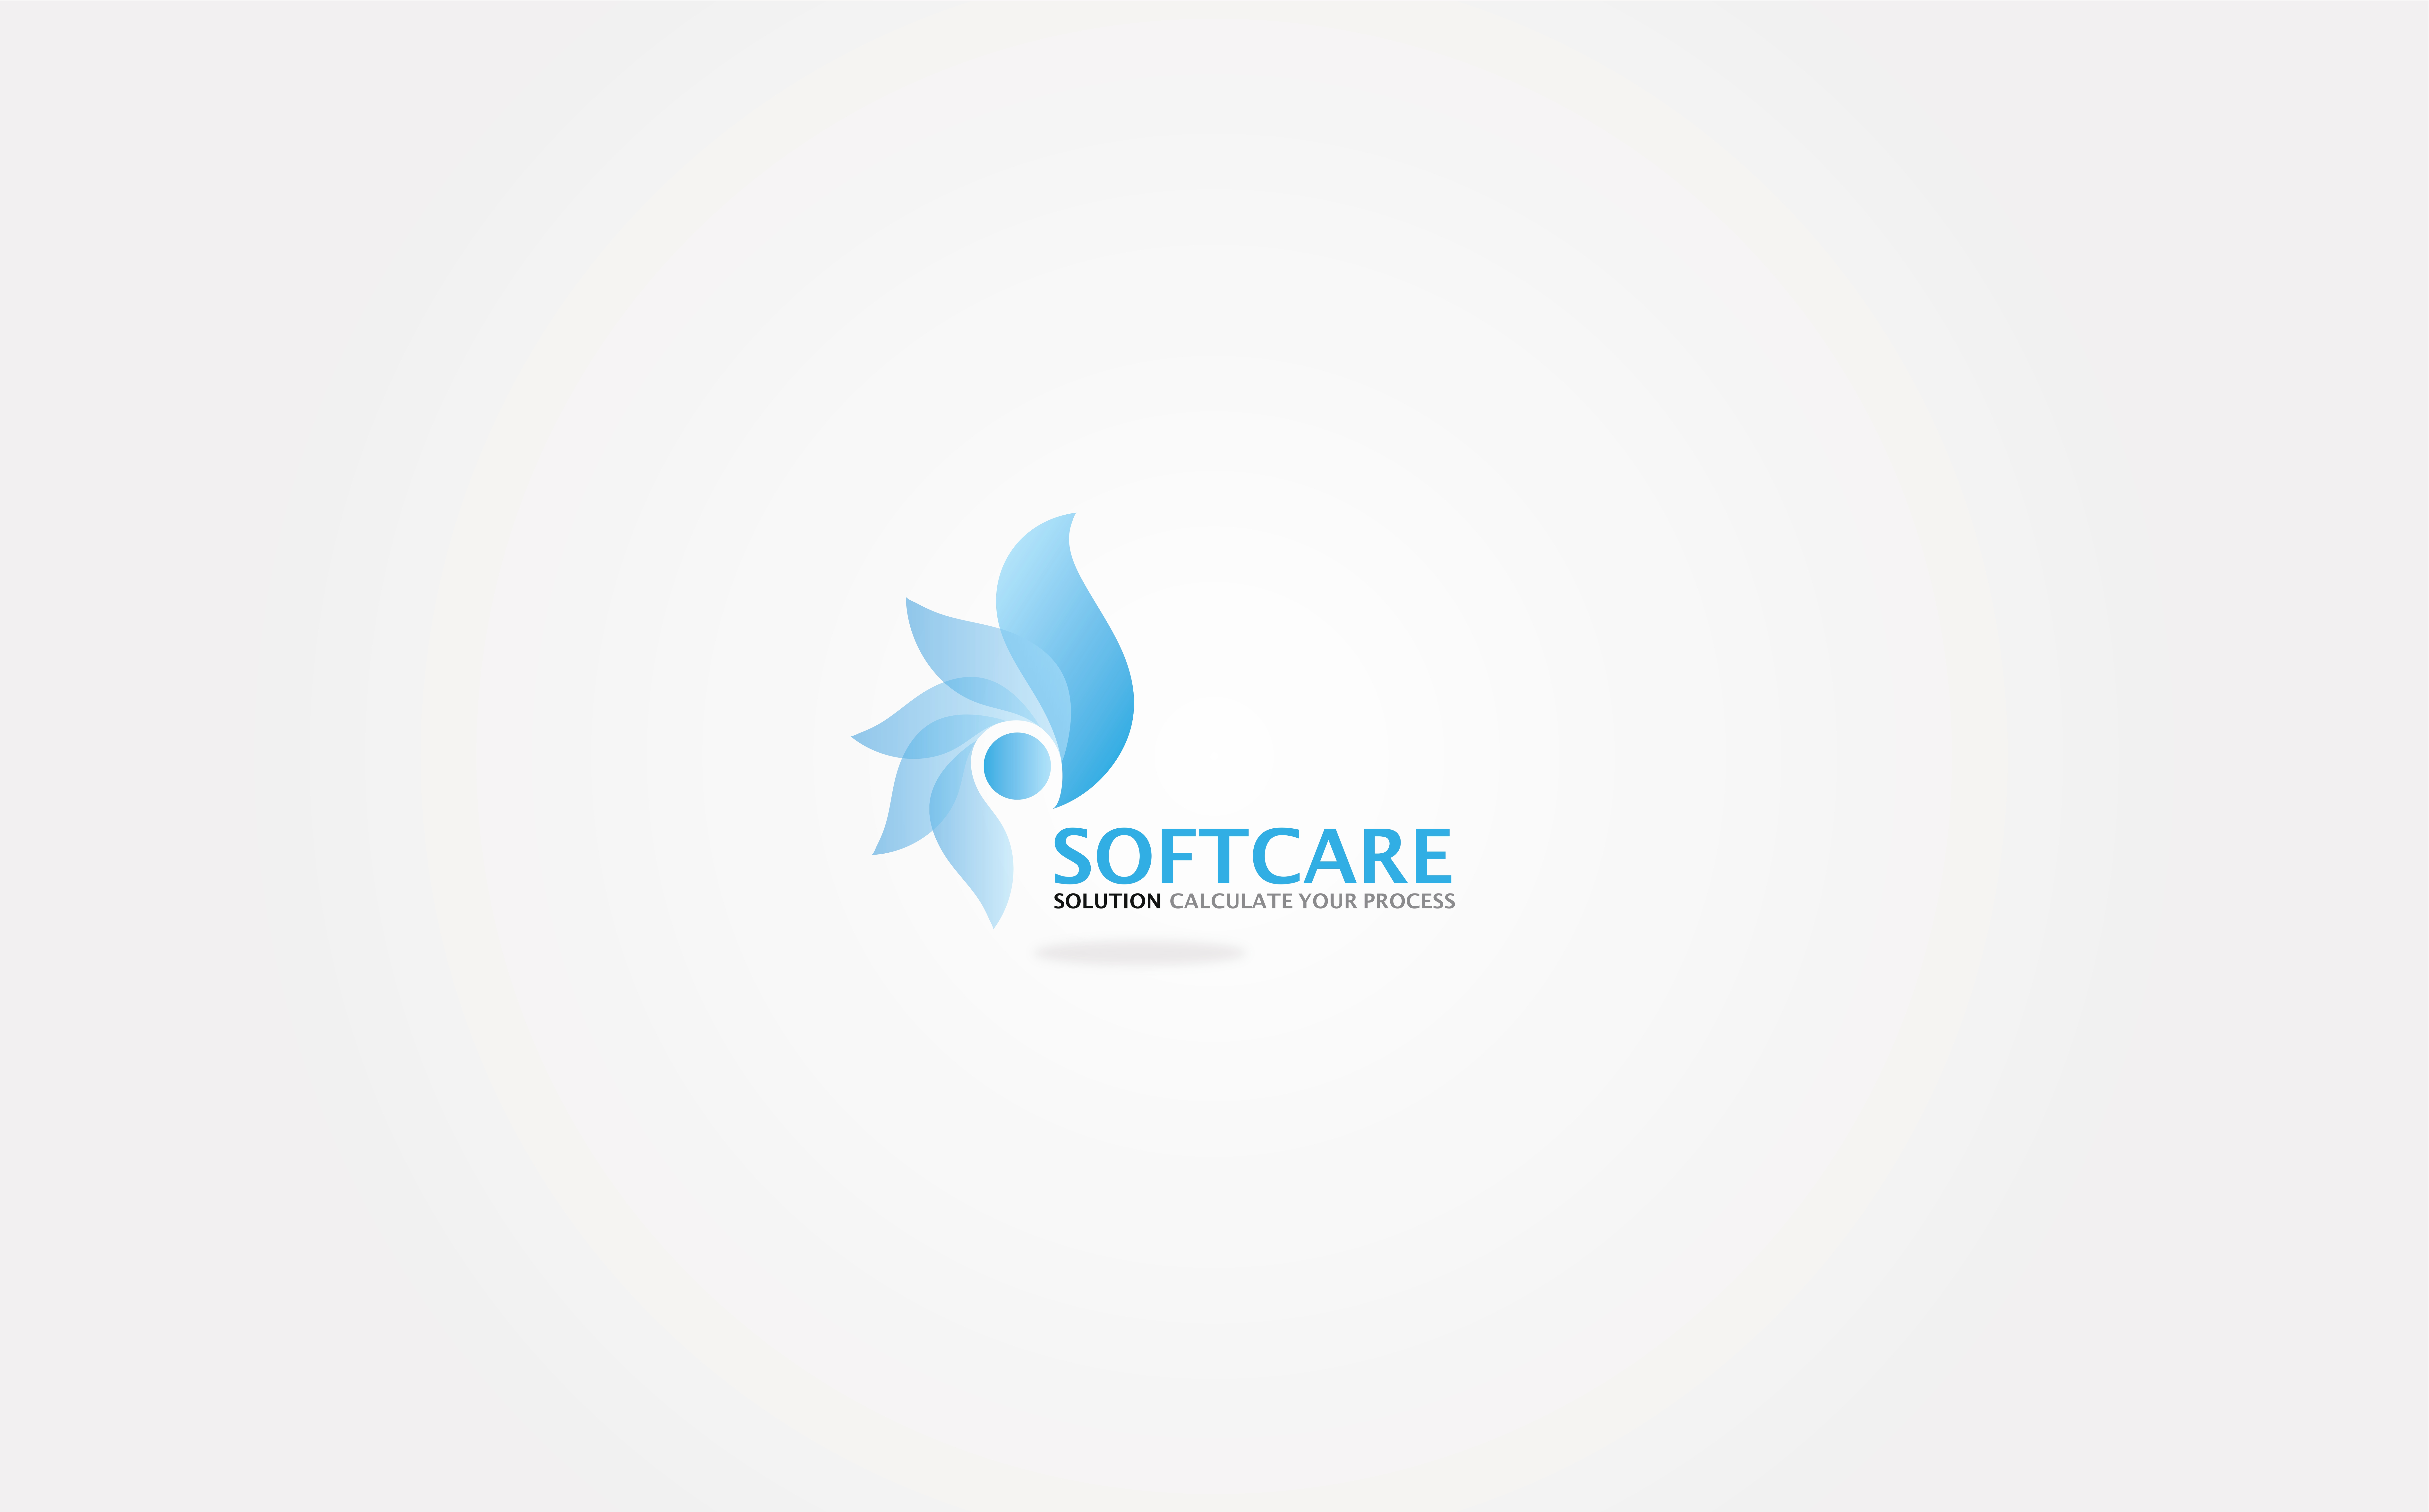 Softcare Solution